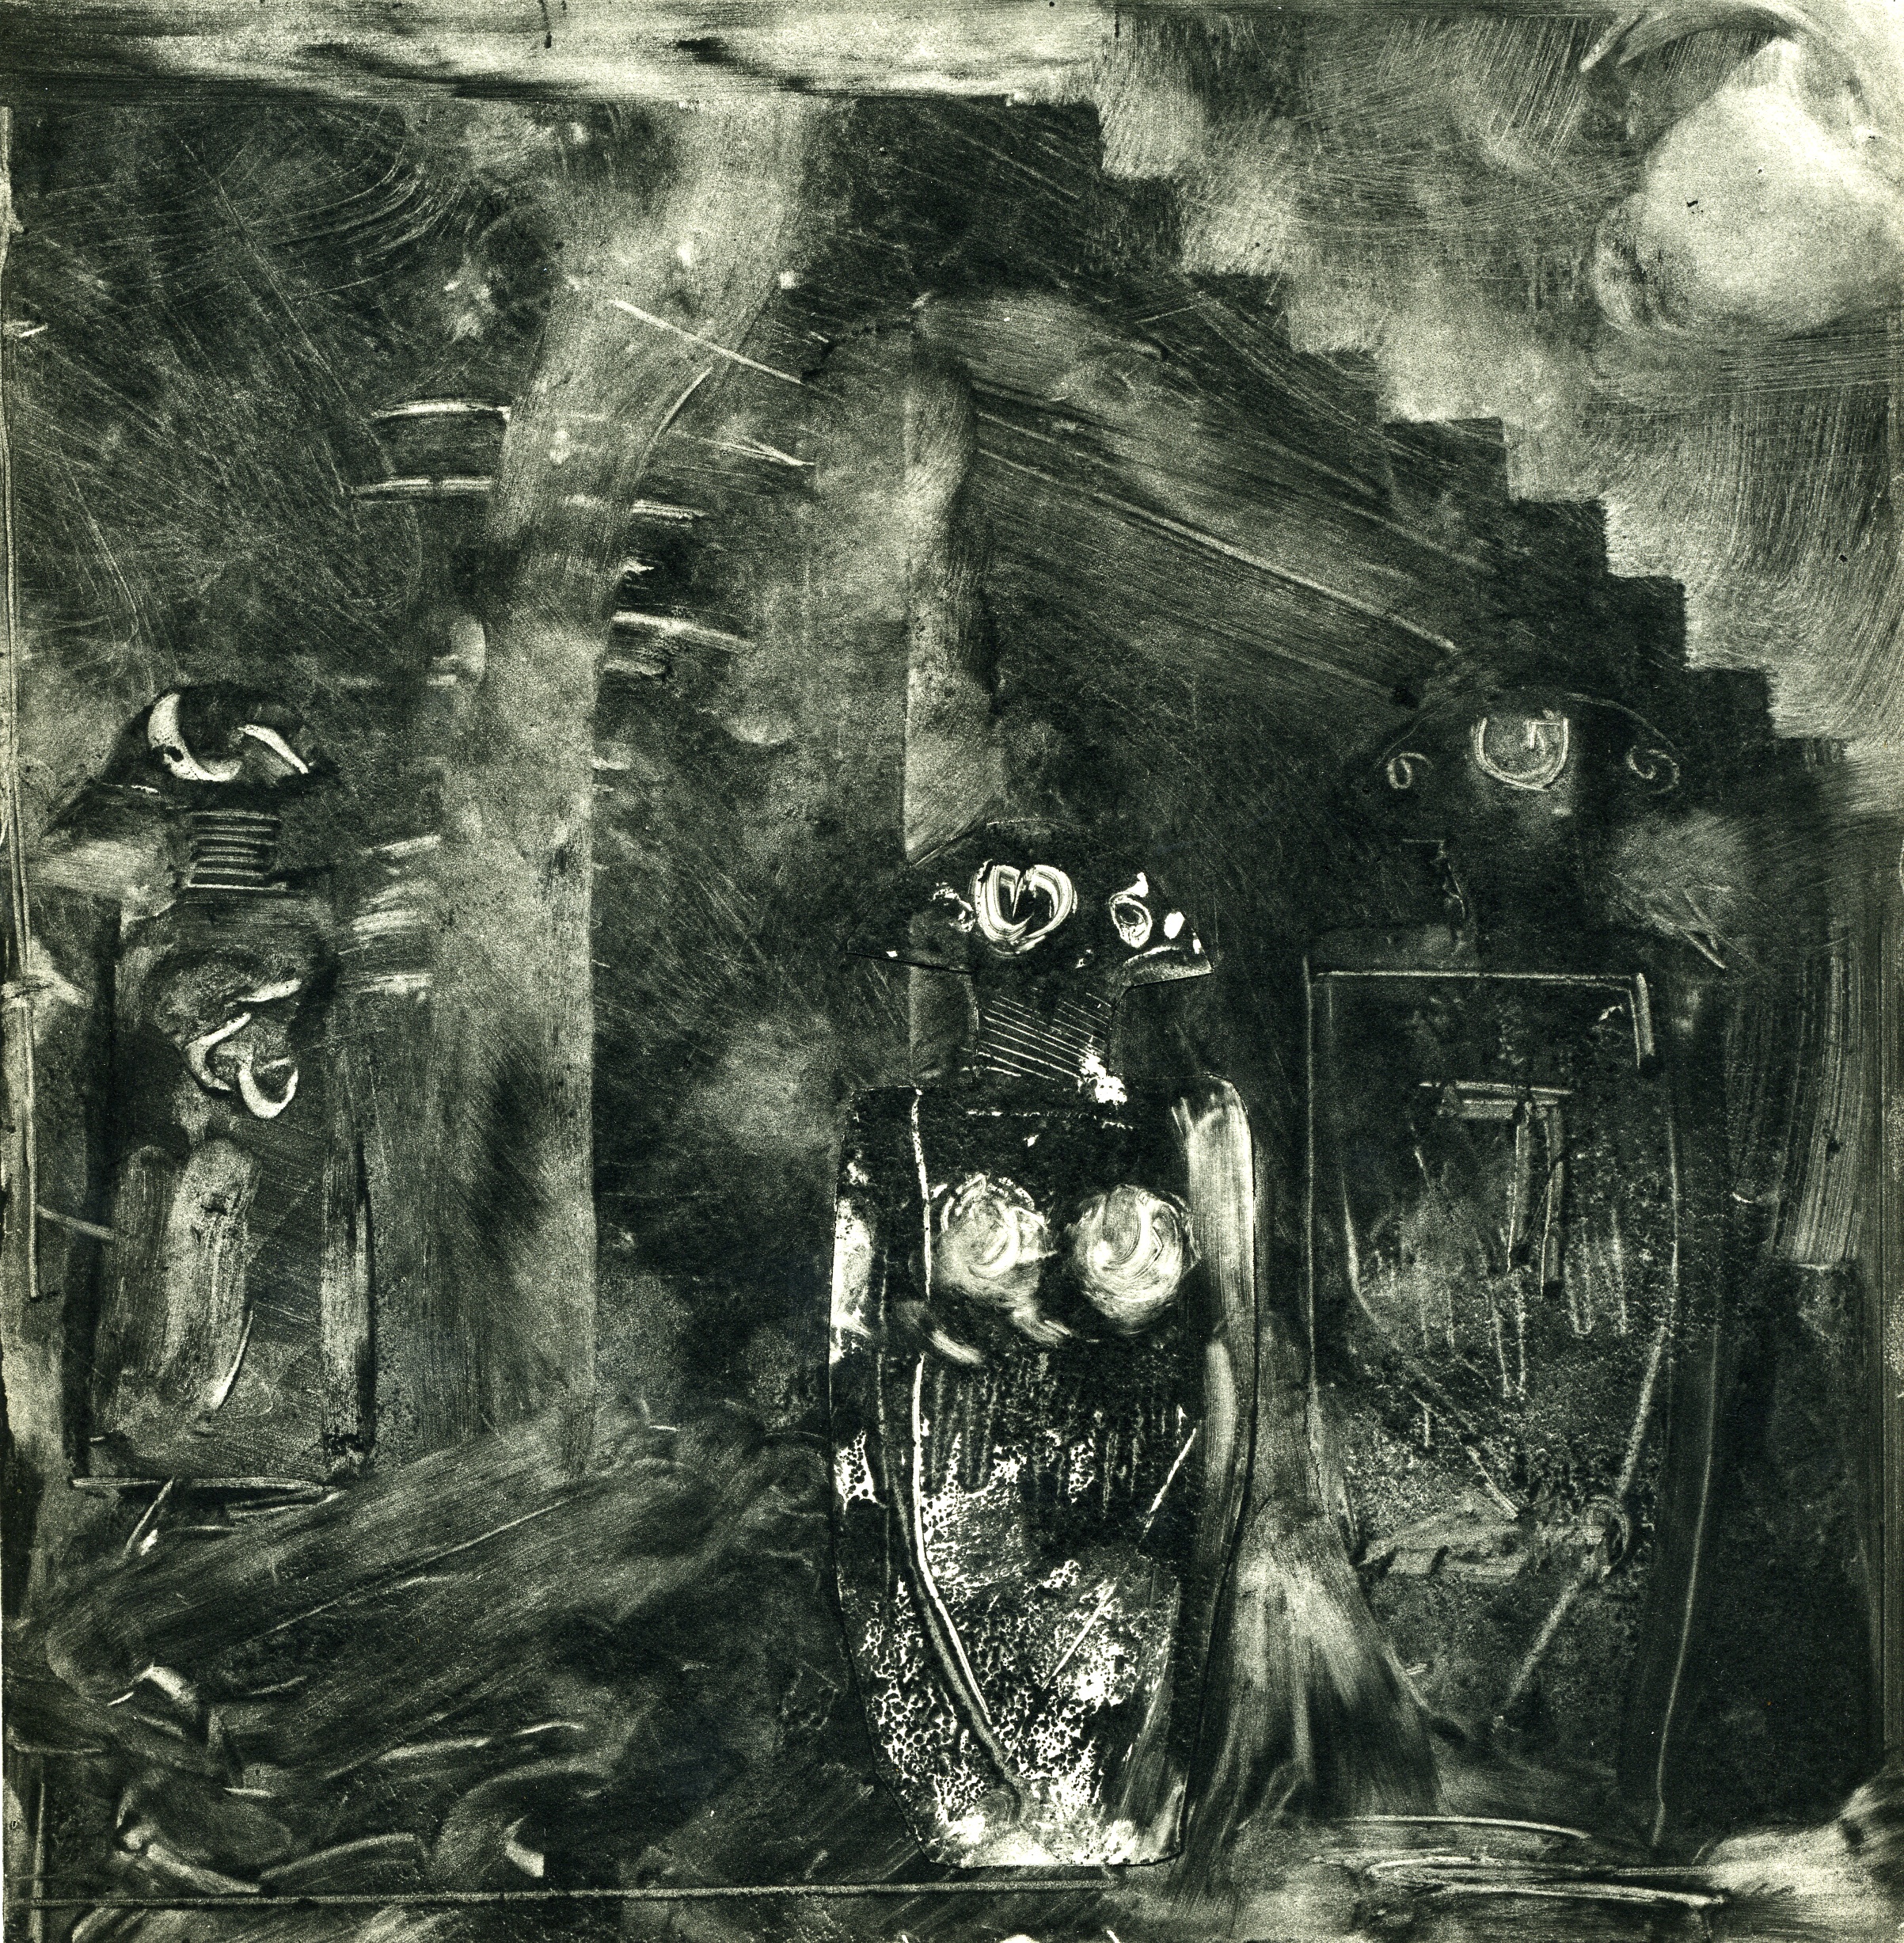  A monotype print by Clive Knights exploring the Statue-Stele of Linuigiana&nbsp; 